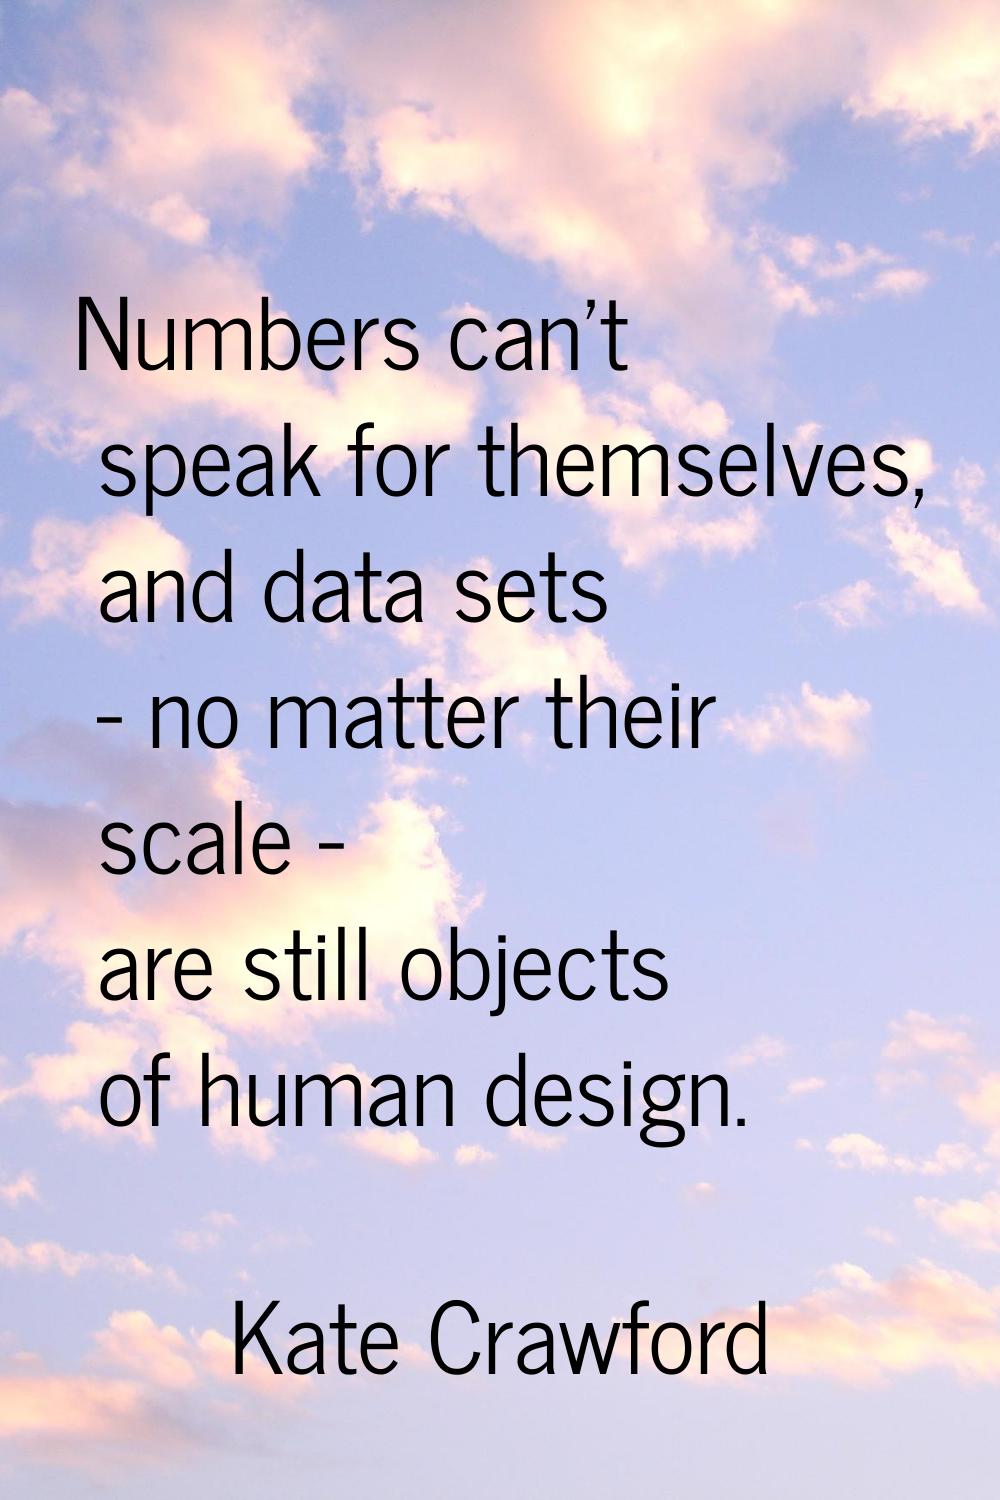 Numbers can't speak for themselves, and data sets - no matter their scale - are still objects of hu